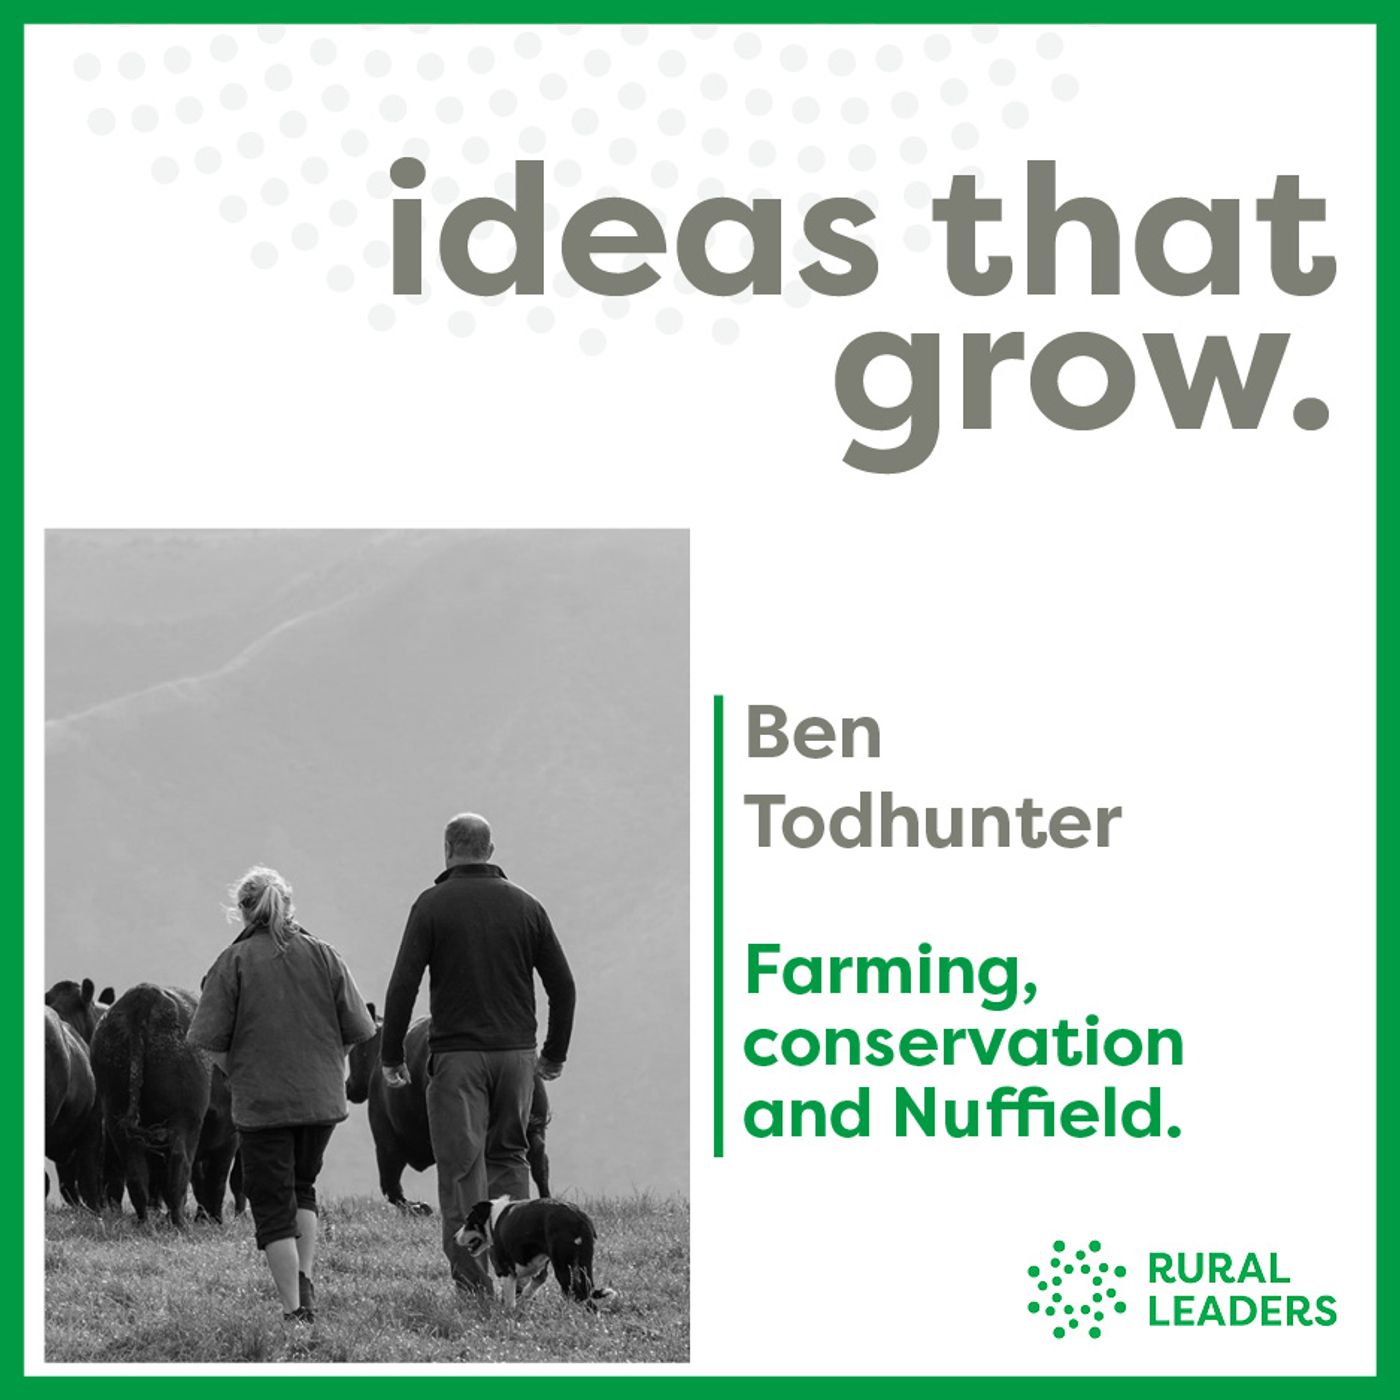 Ben Todhunter - Farming, conservation and Nuffield.